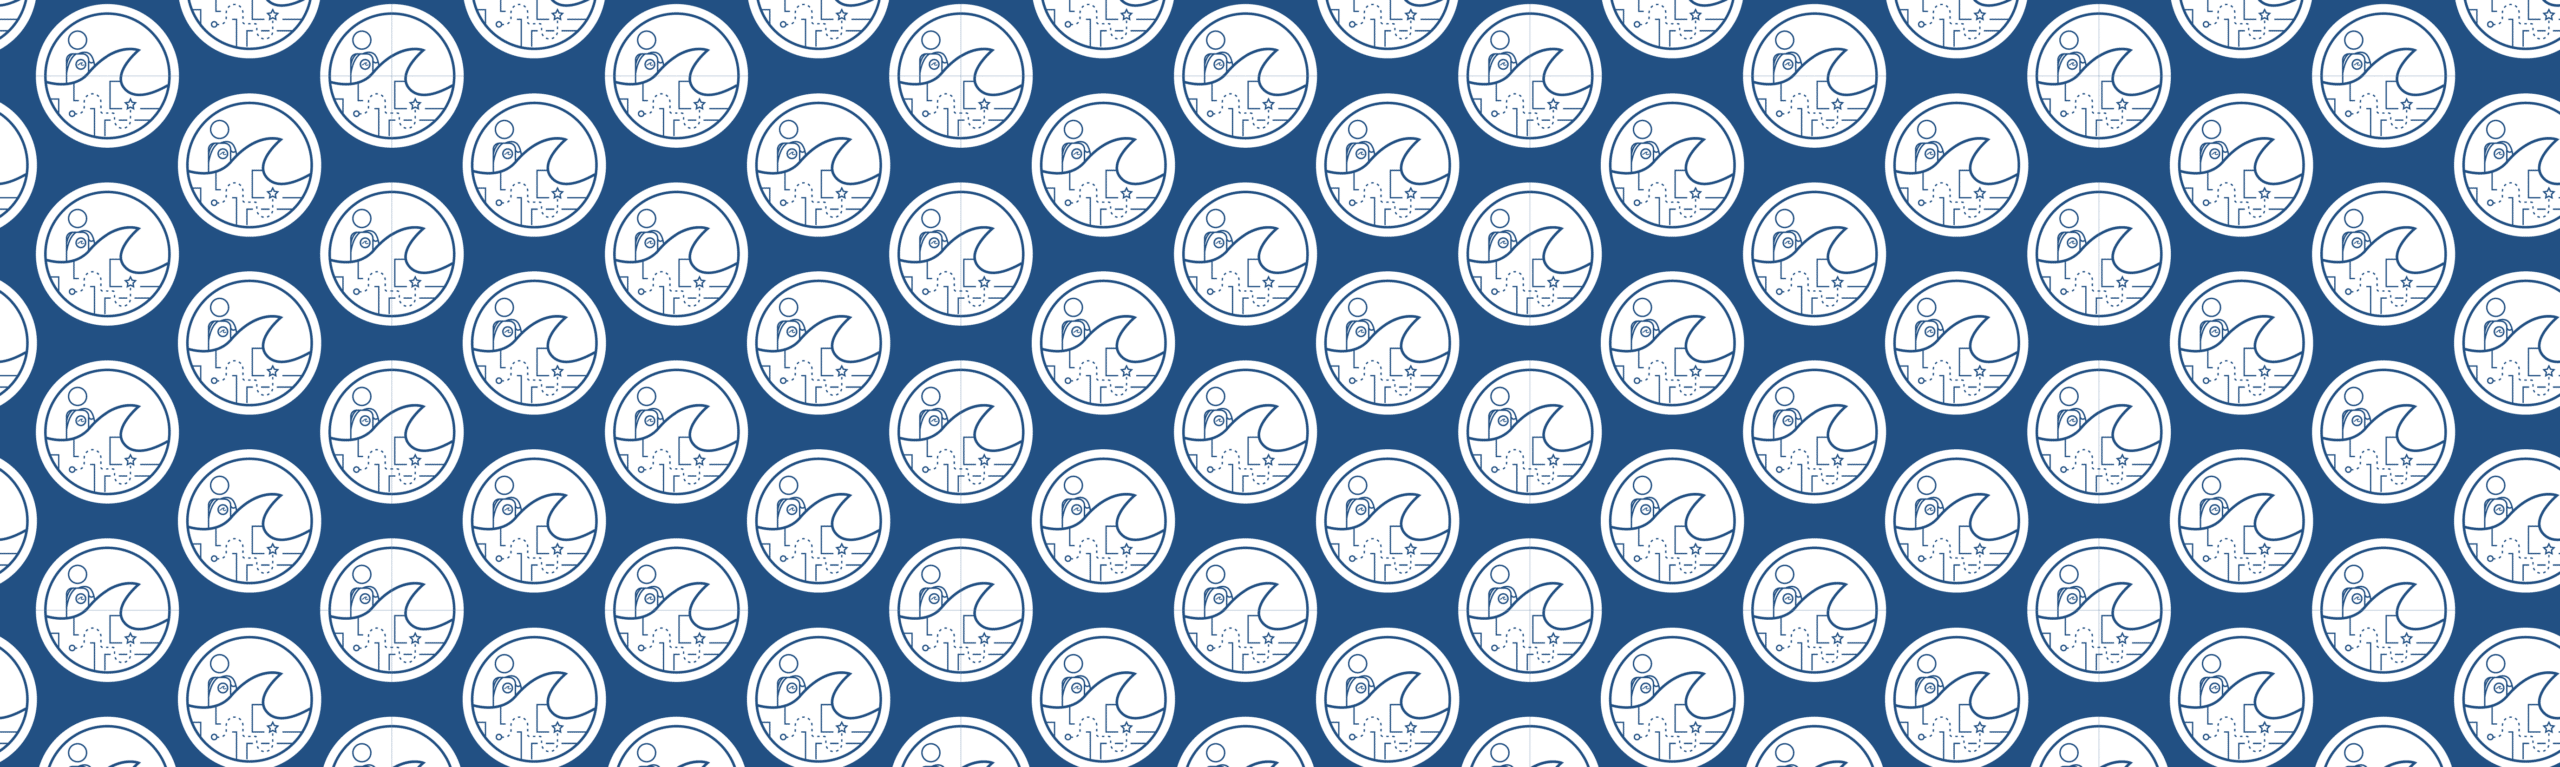 Blue background with repeated white icons with person, wave, and map